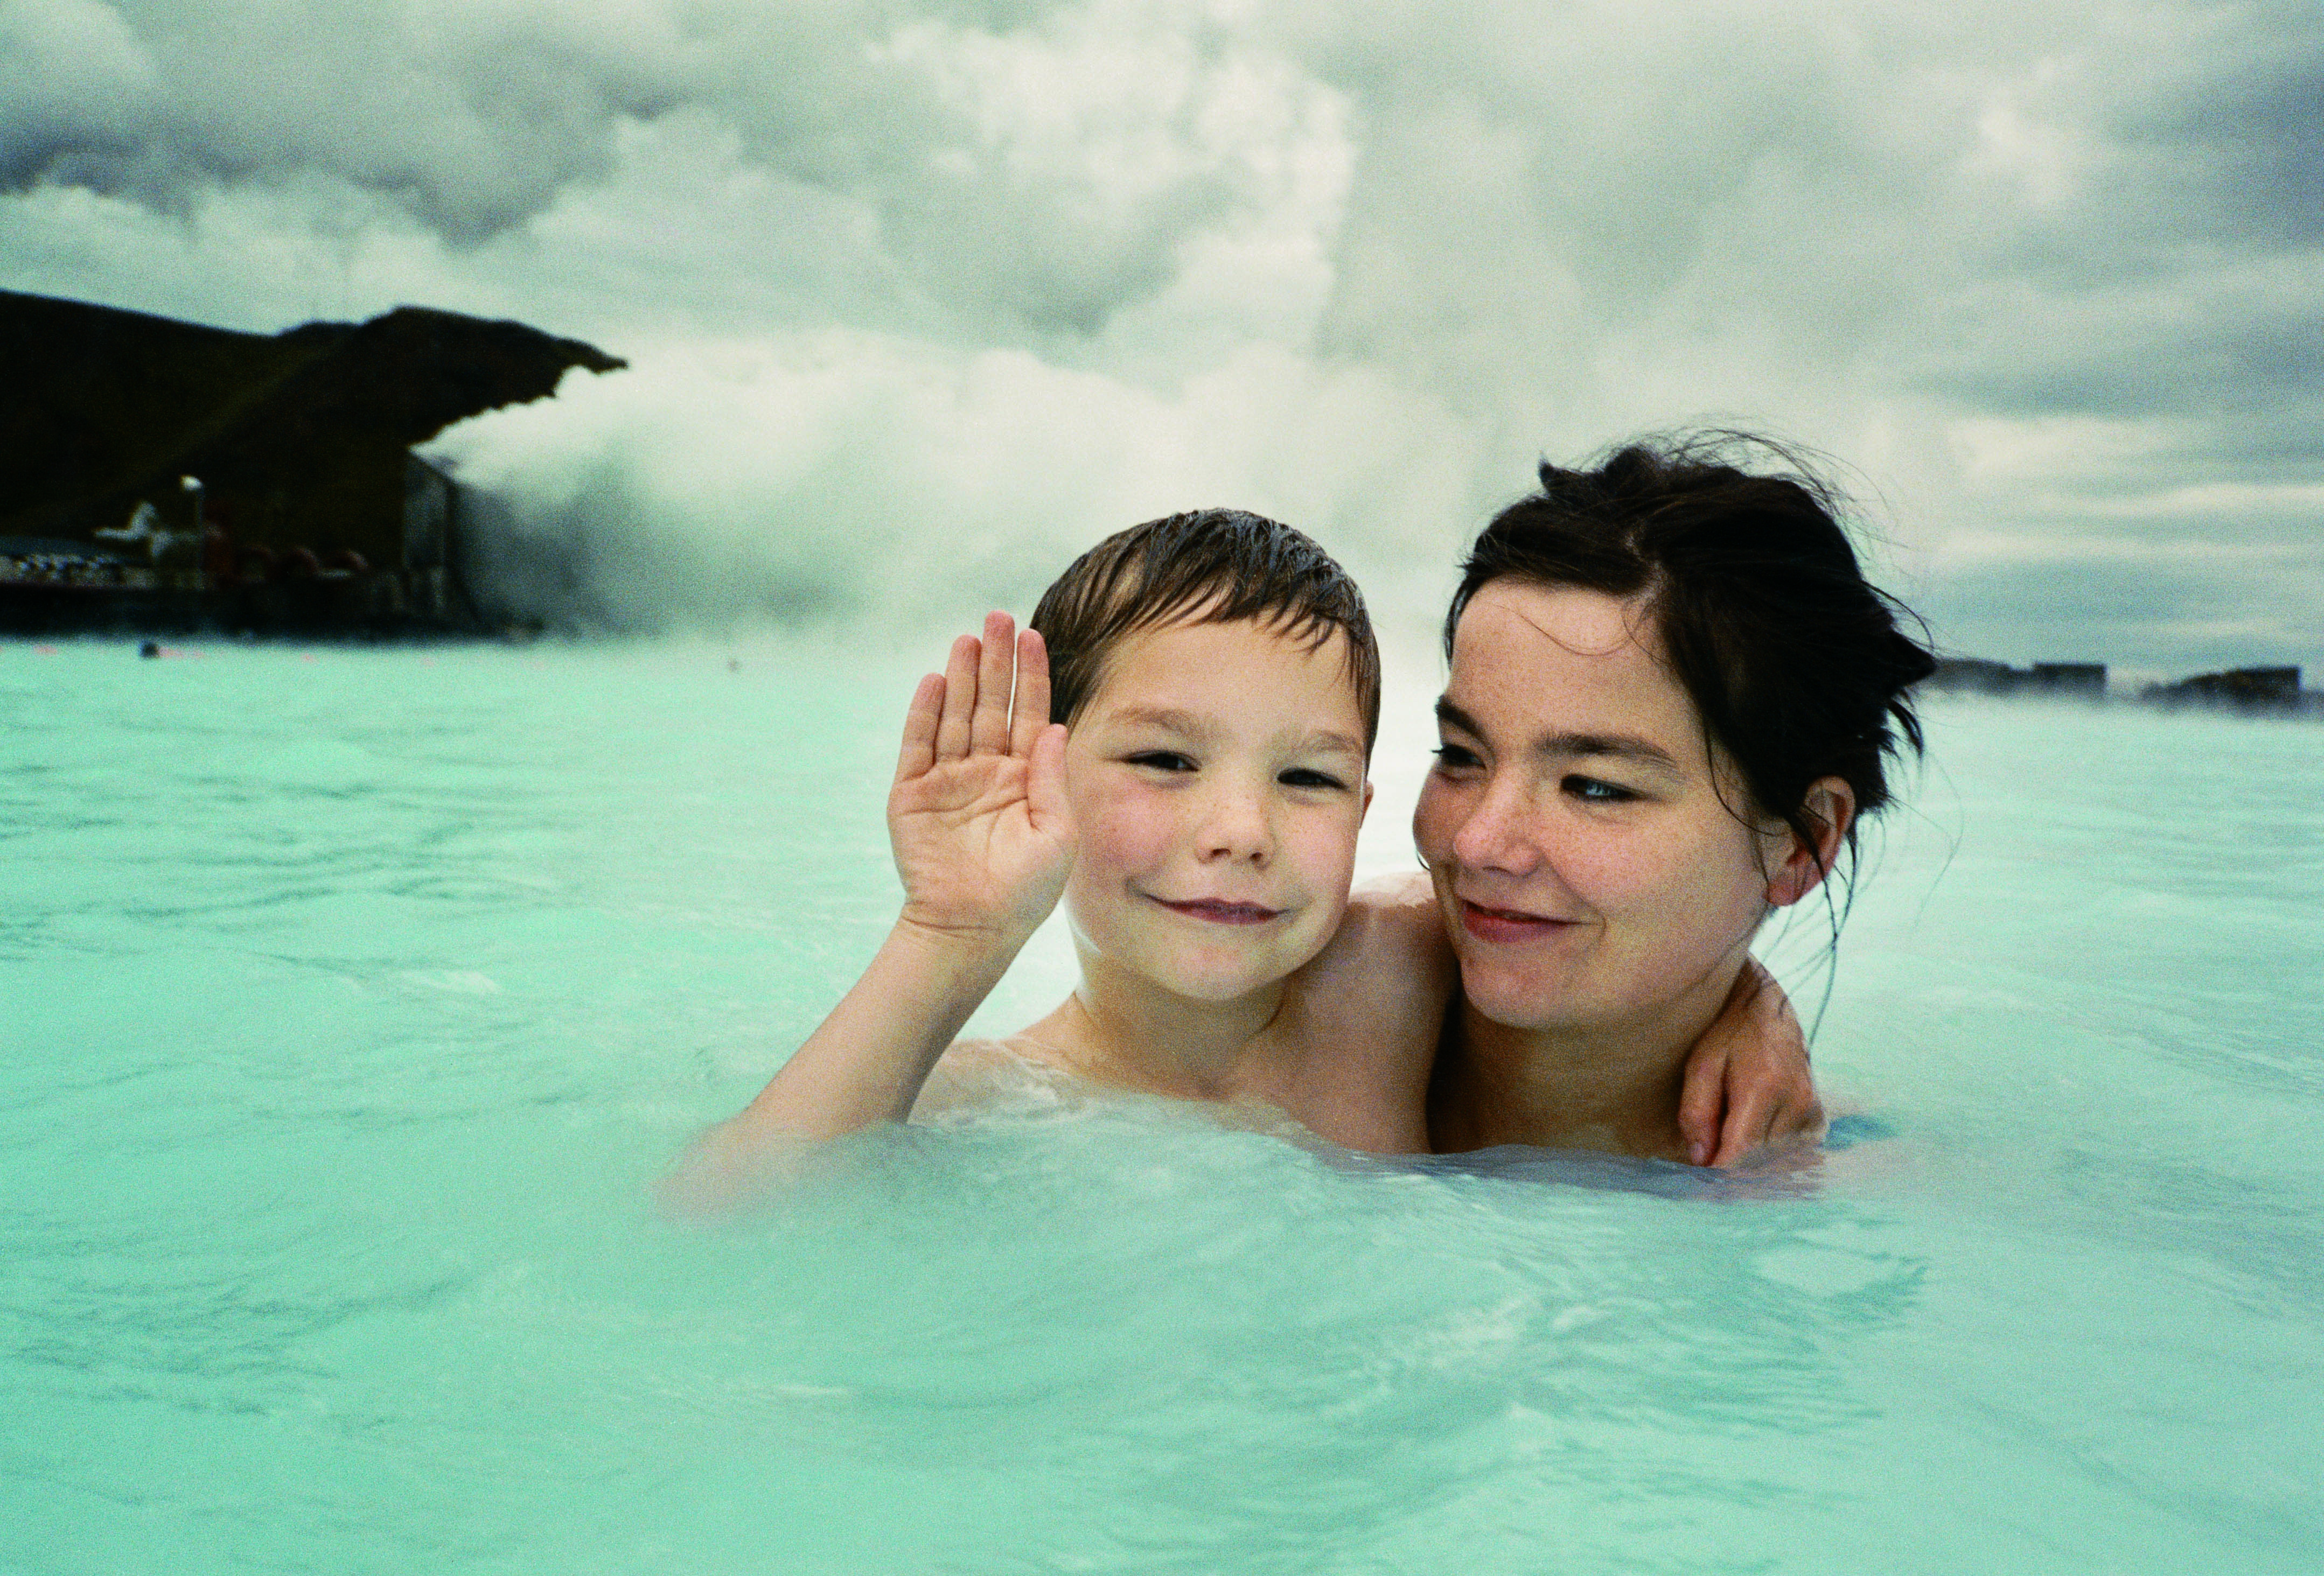 Björk and son in thermal pool